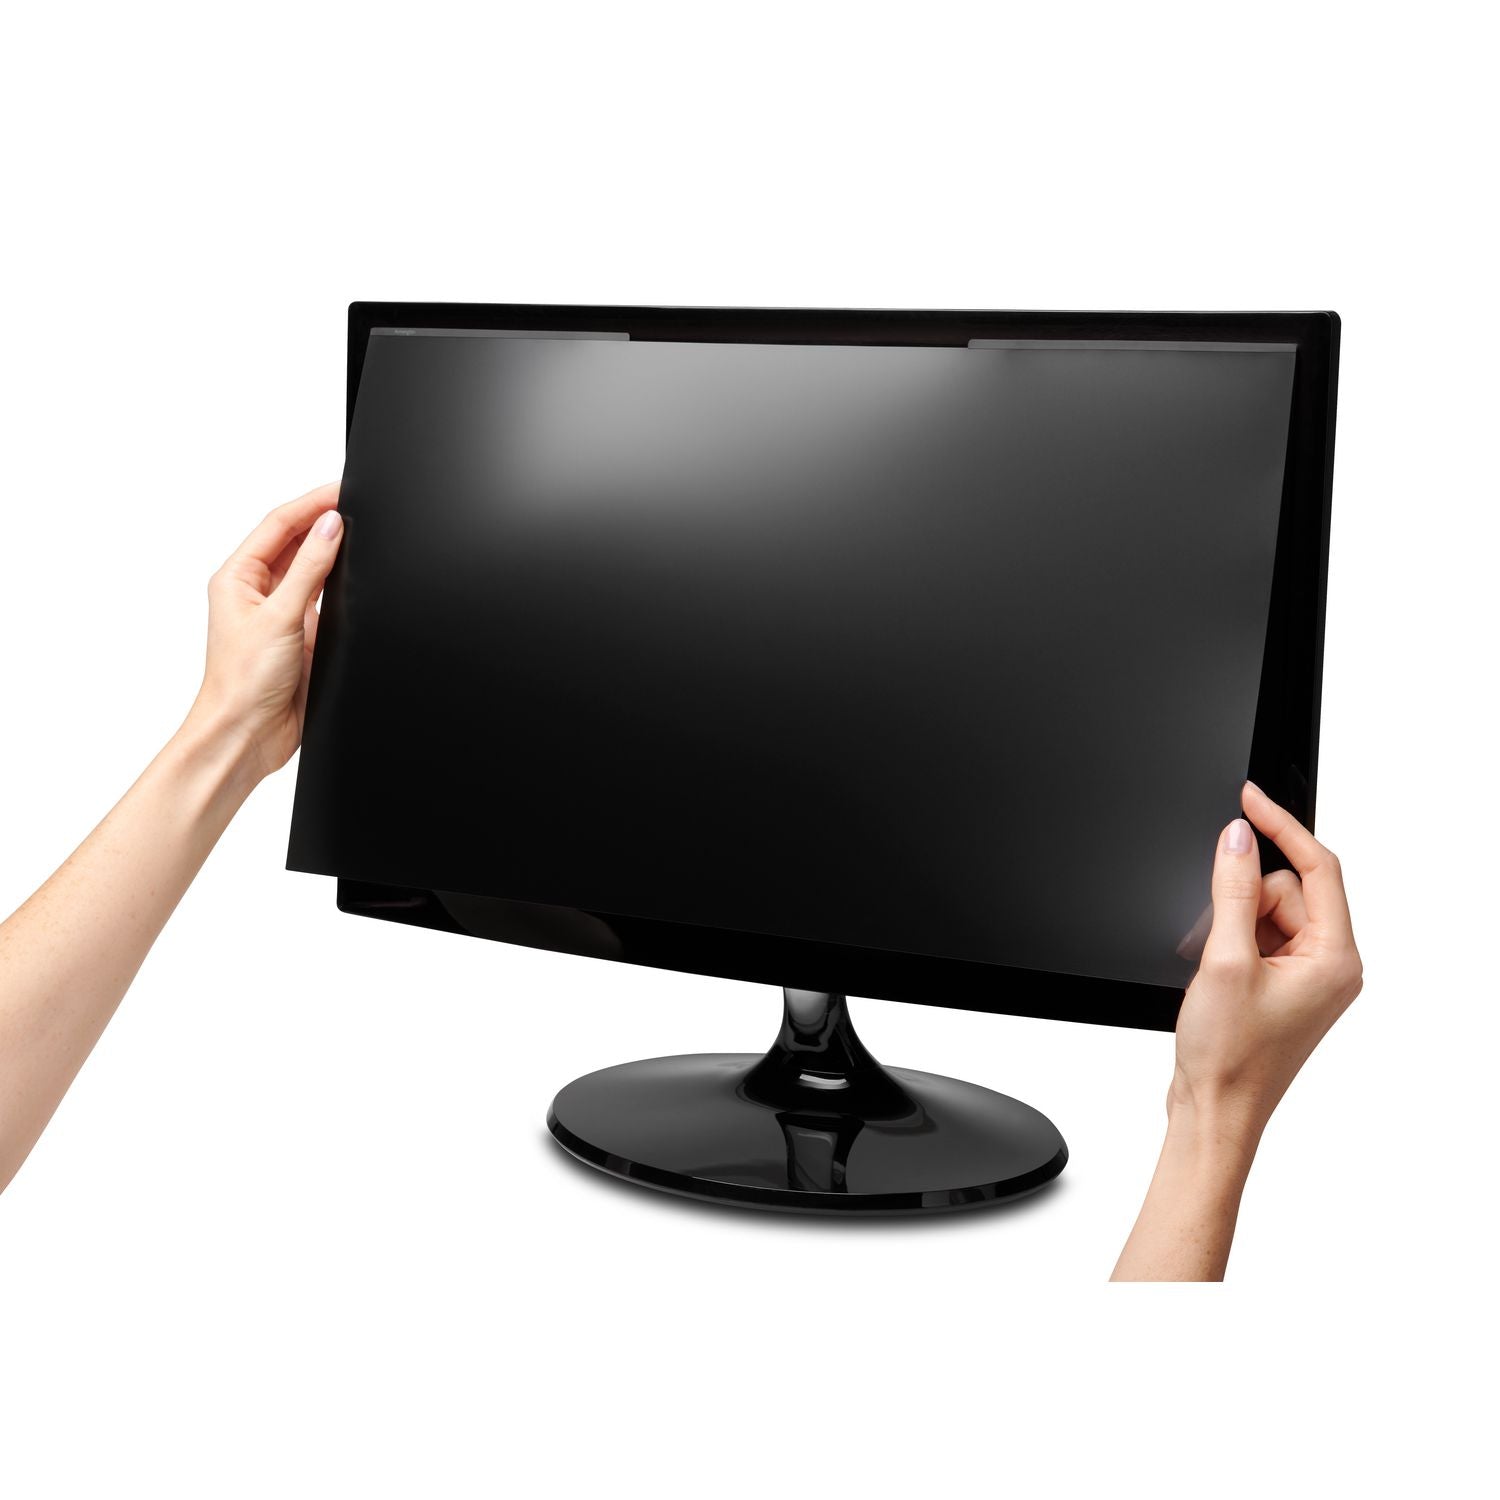 magnetic-monitor-privacy-screen-for-238-widescreen-flat-panel-monitors-169-aspect-ratio_kmw58356 - 8